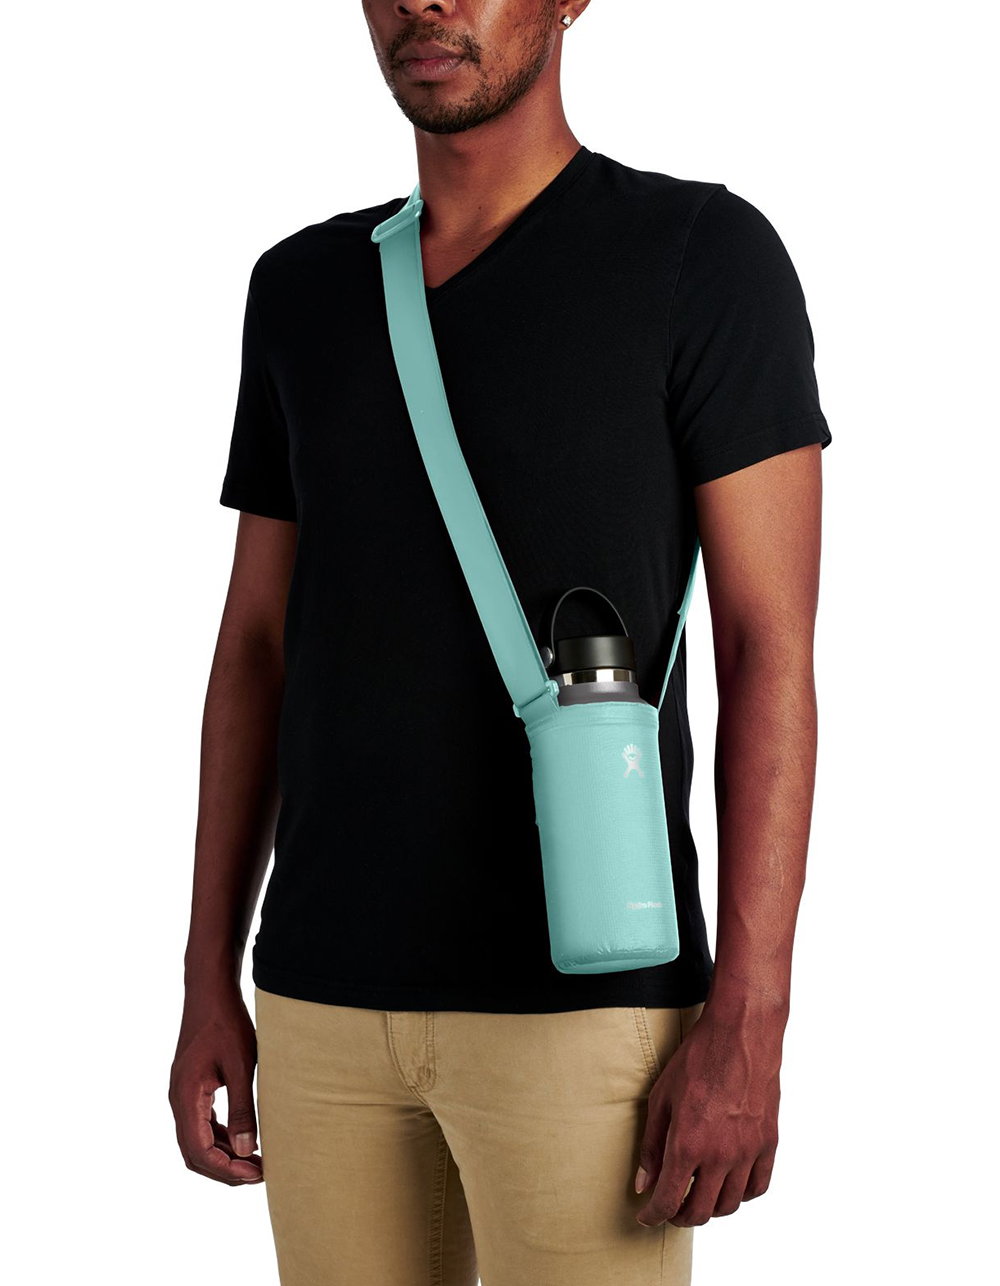 Hydro Flask Small Packable Bottle Sling Cactus Small PBSS752